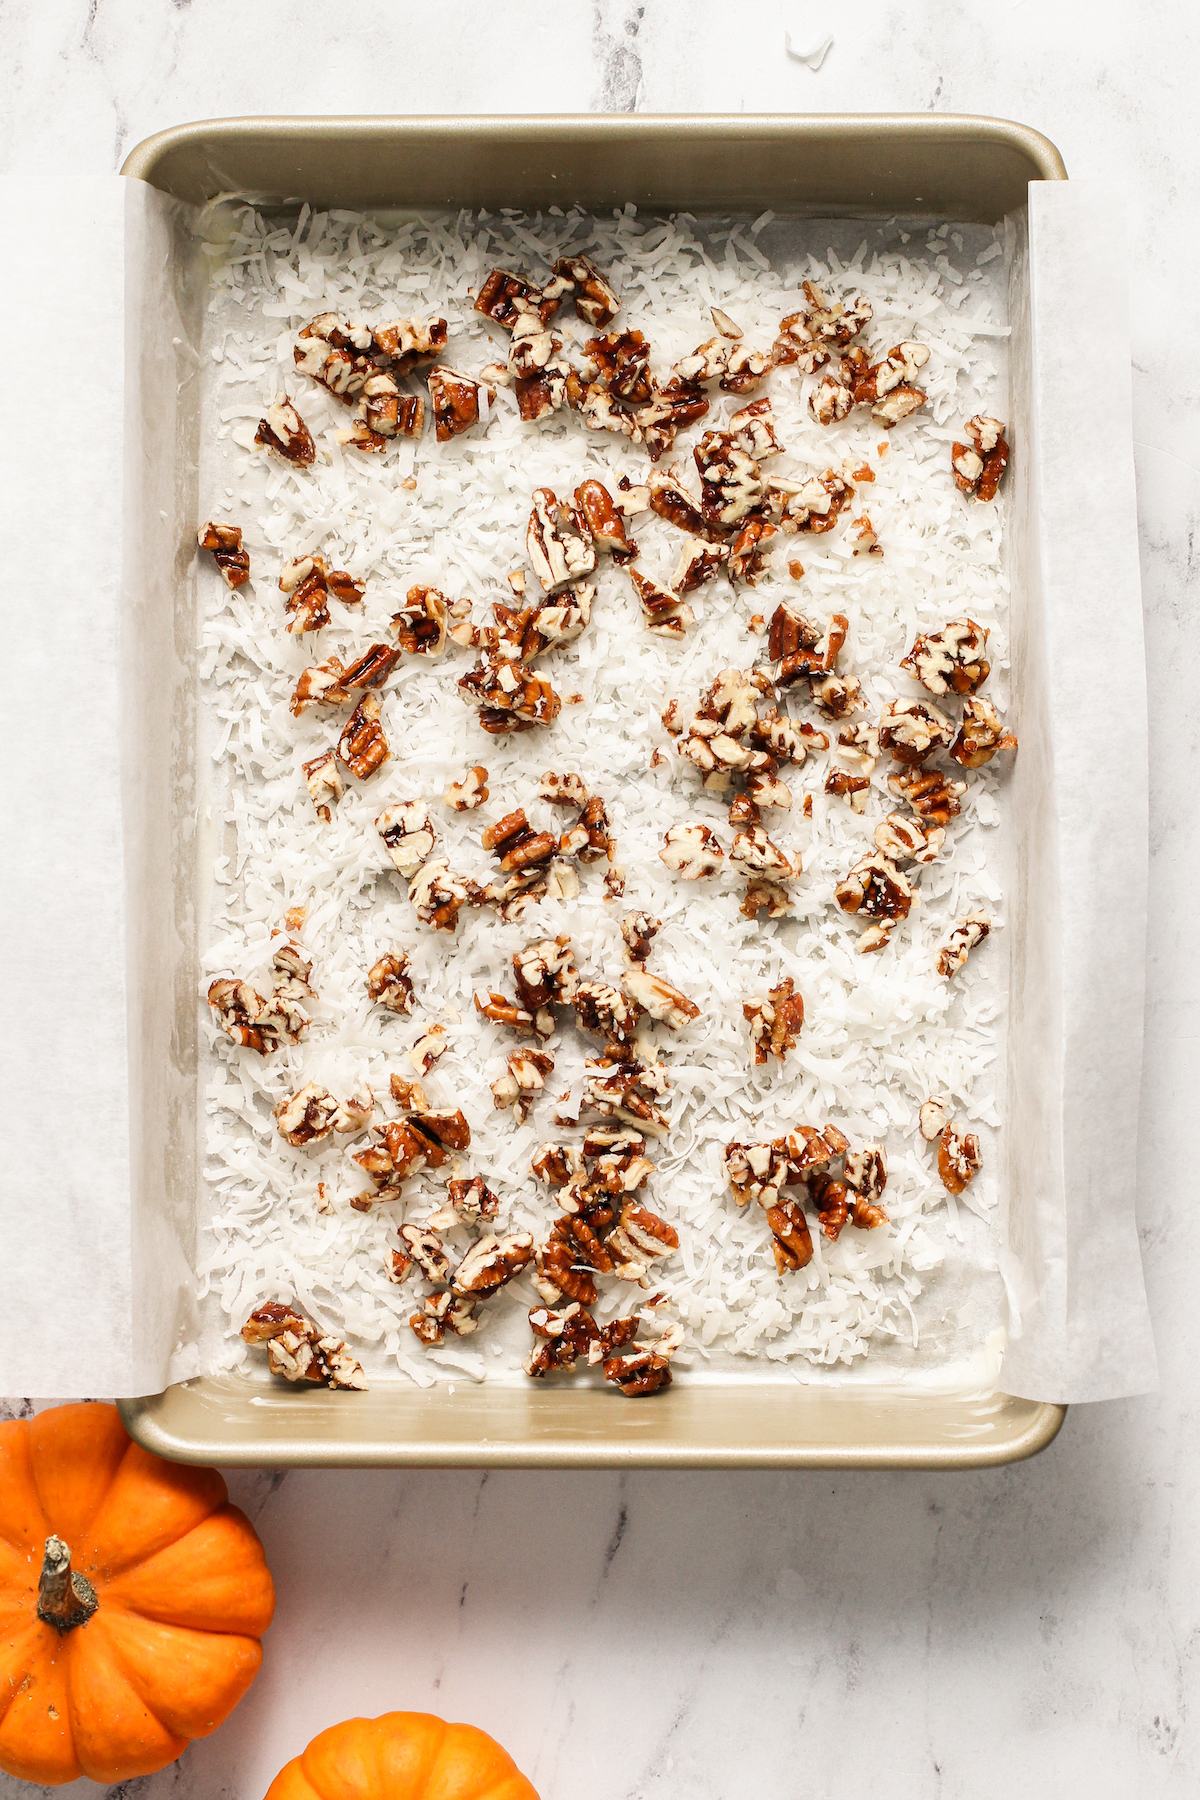 Praline pecans and coconut flakes scattered over the bottom of a cake pan.